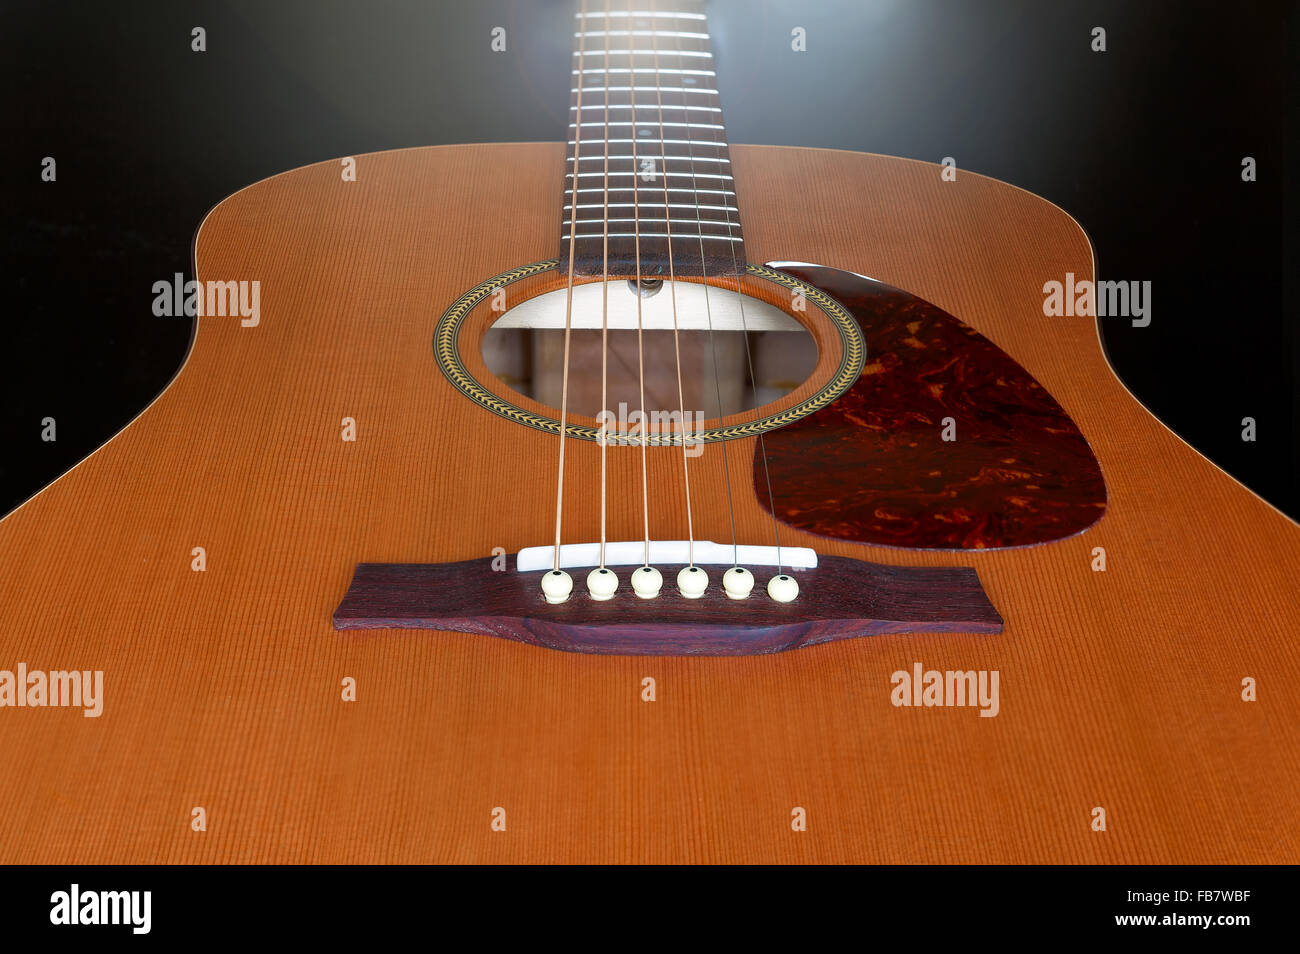 Steel Strings Acoustic Guitar Perspective Closeup Stock Photo